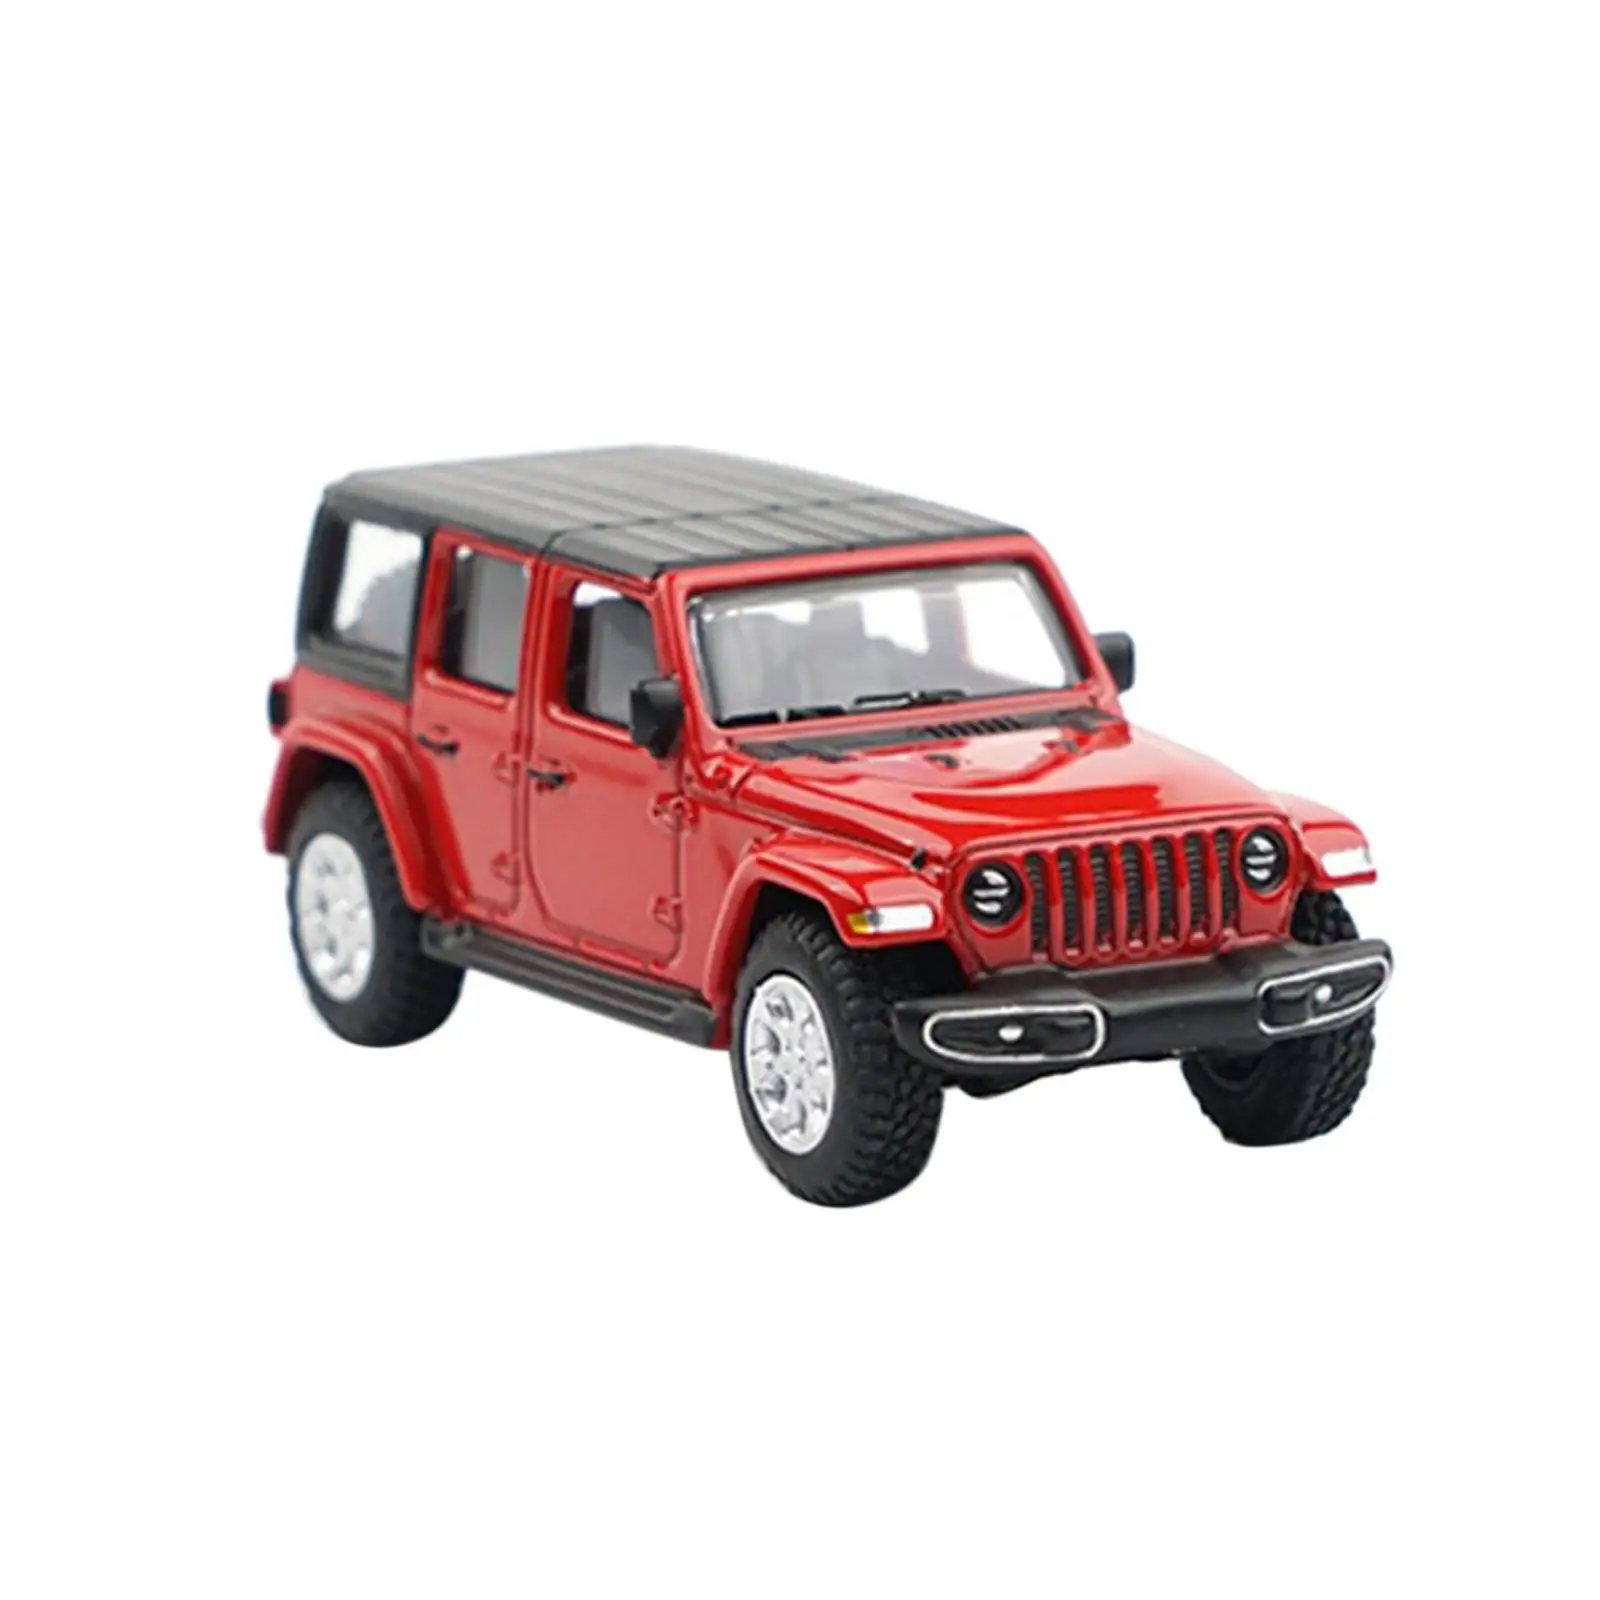 

1:64 Diecast Cars Collectible Model Car Alloy Casting Vehicles toys 1/64 SUV Vehicle Model for Adults Gift Toddlers boy